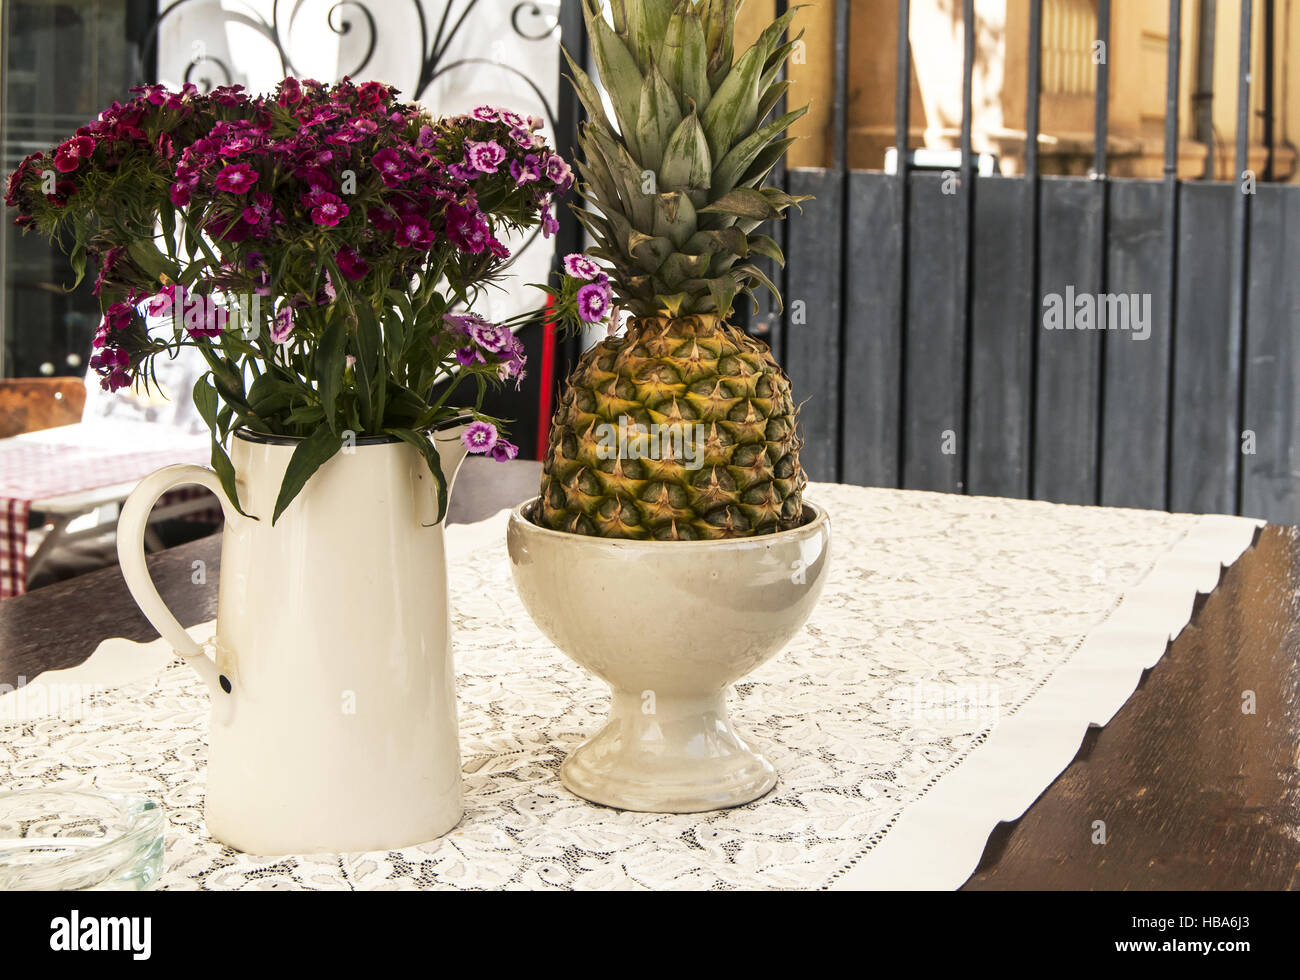 Flowers and pineapple on table Stock Photo